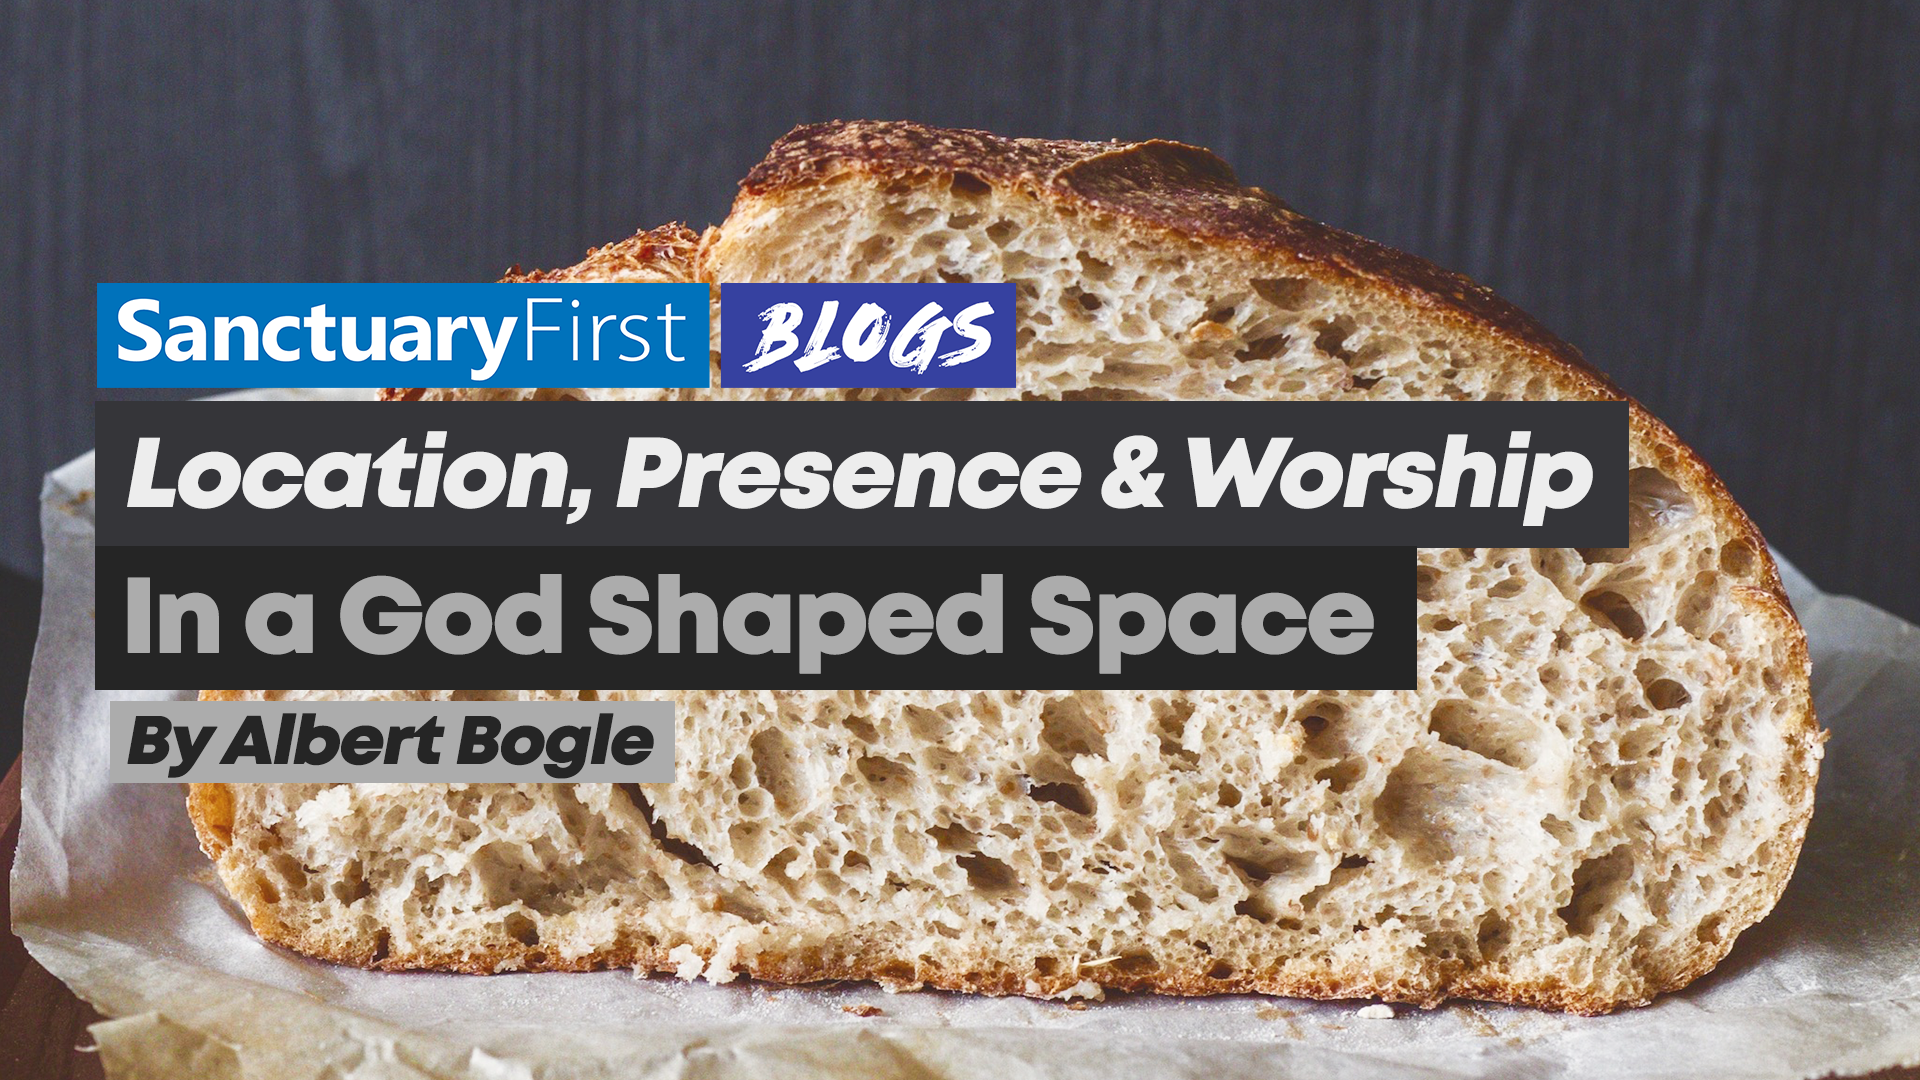 Location, presence and worship in a God shaped space